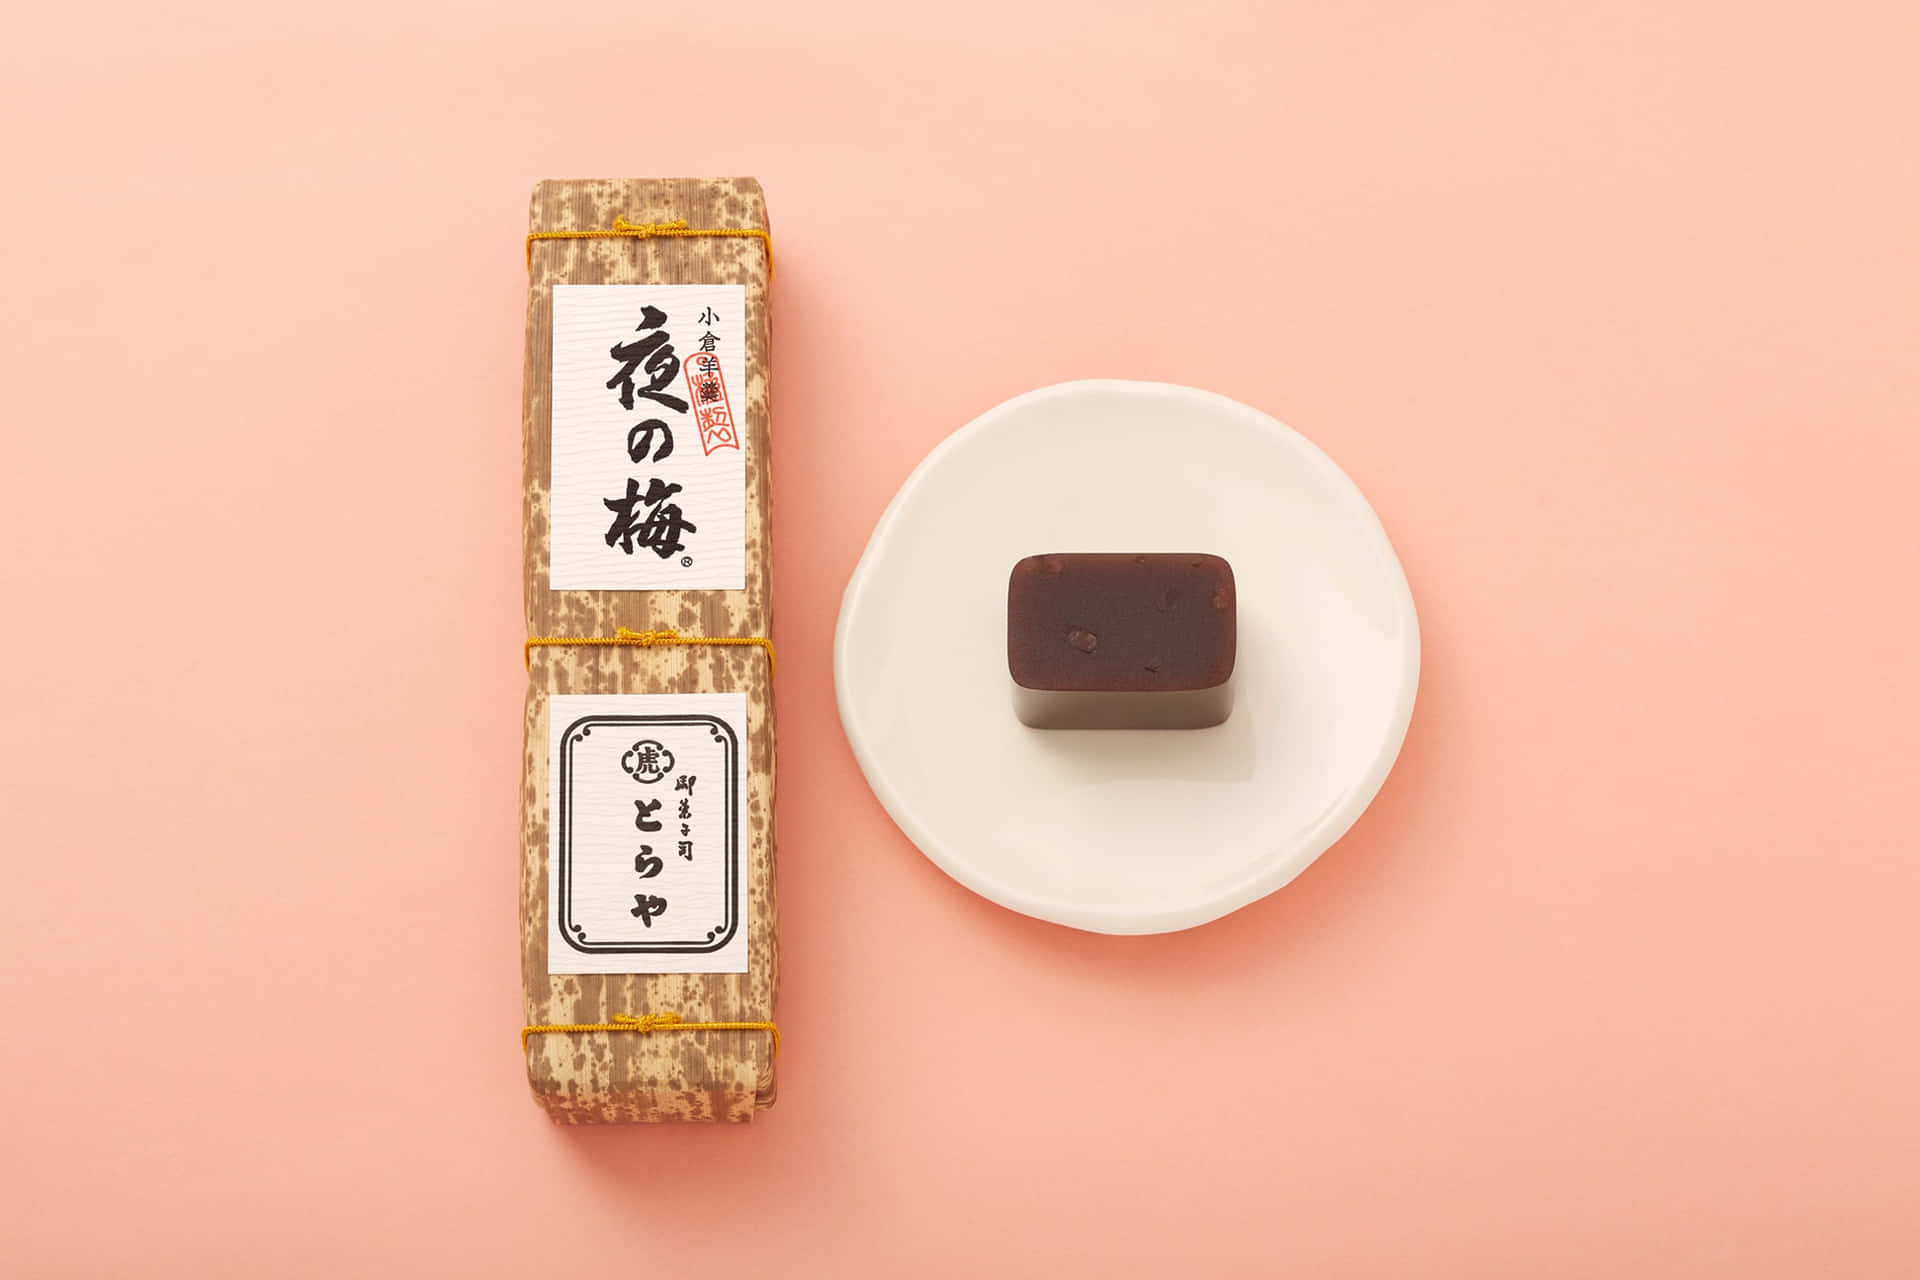 Delectable Assortment of Japanese Sweets Wallpaper